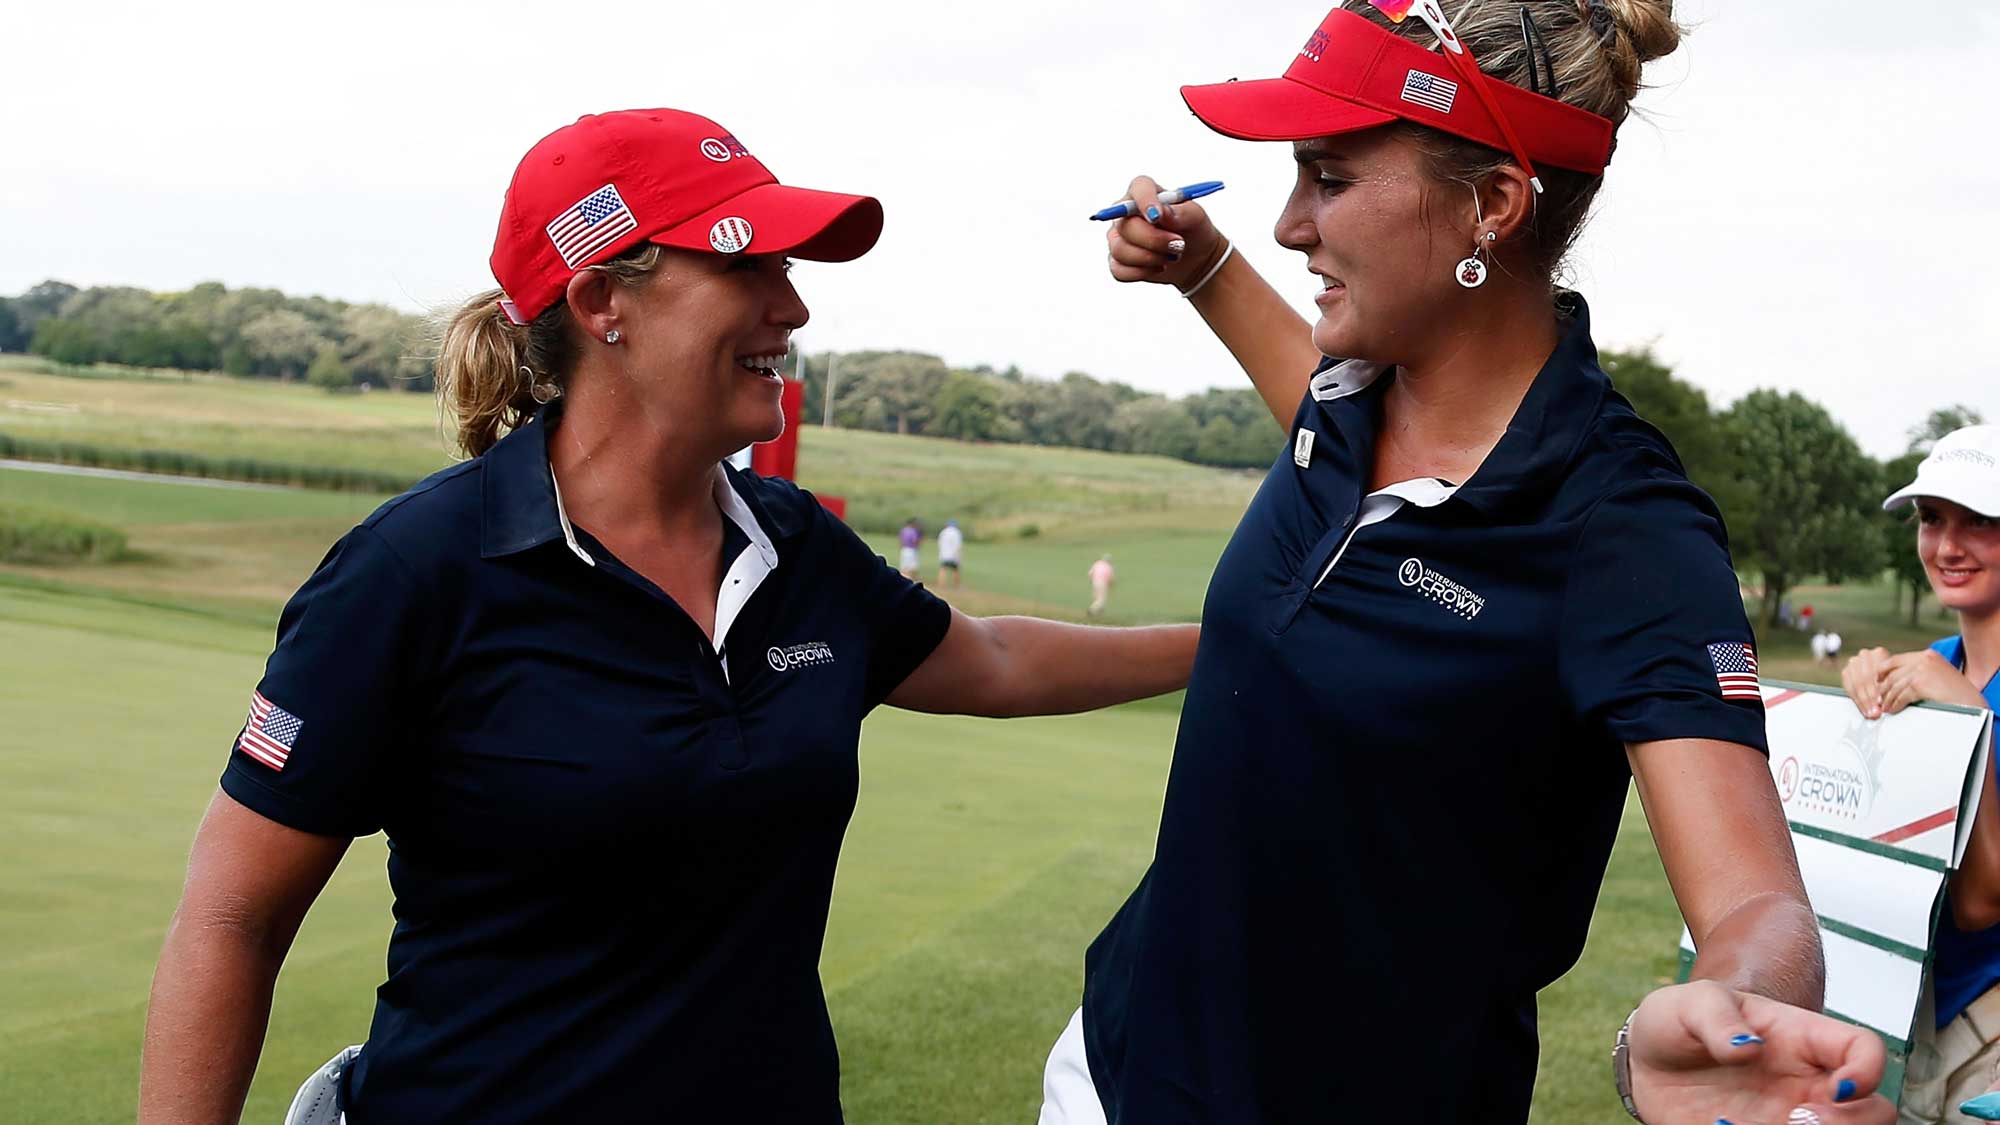 (L) Cristie Kerr and (R) Lexi Thompson of the United States celebrate after winning the 2016 UL International Crown 